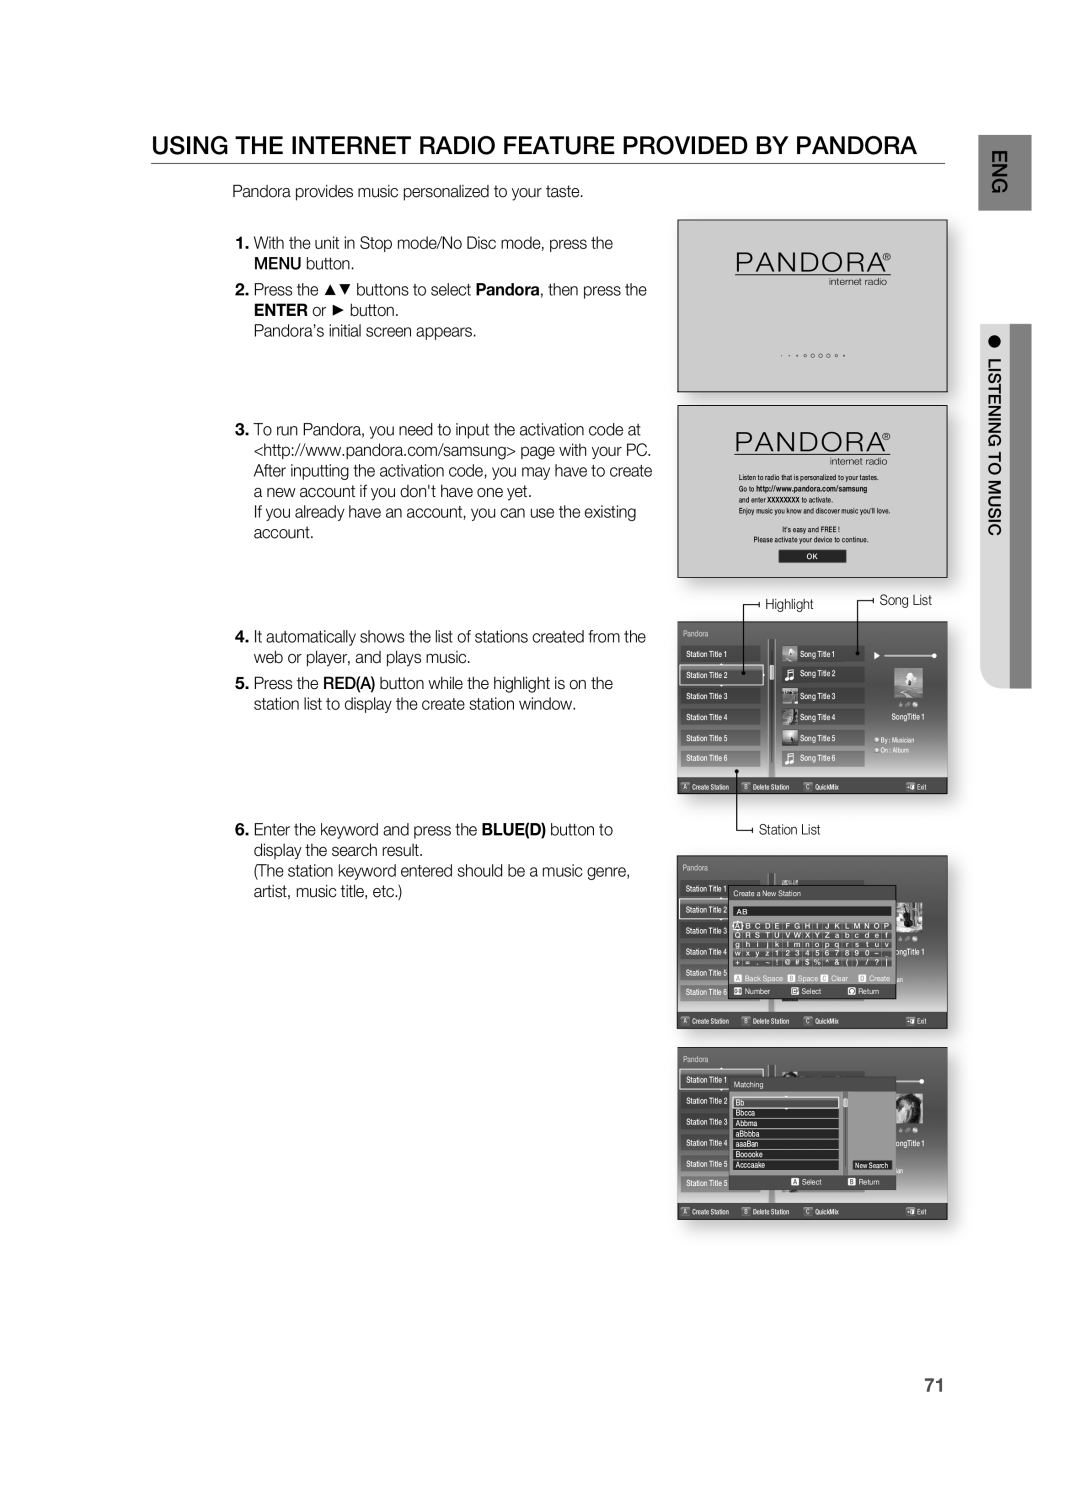 Samsung HT-BD1200 Using The Internet Radio Feature Provided By Pandora, display the search result, Highlight, Station List 